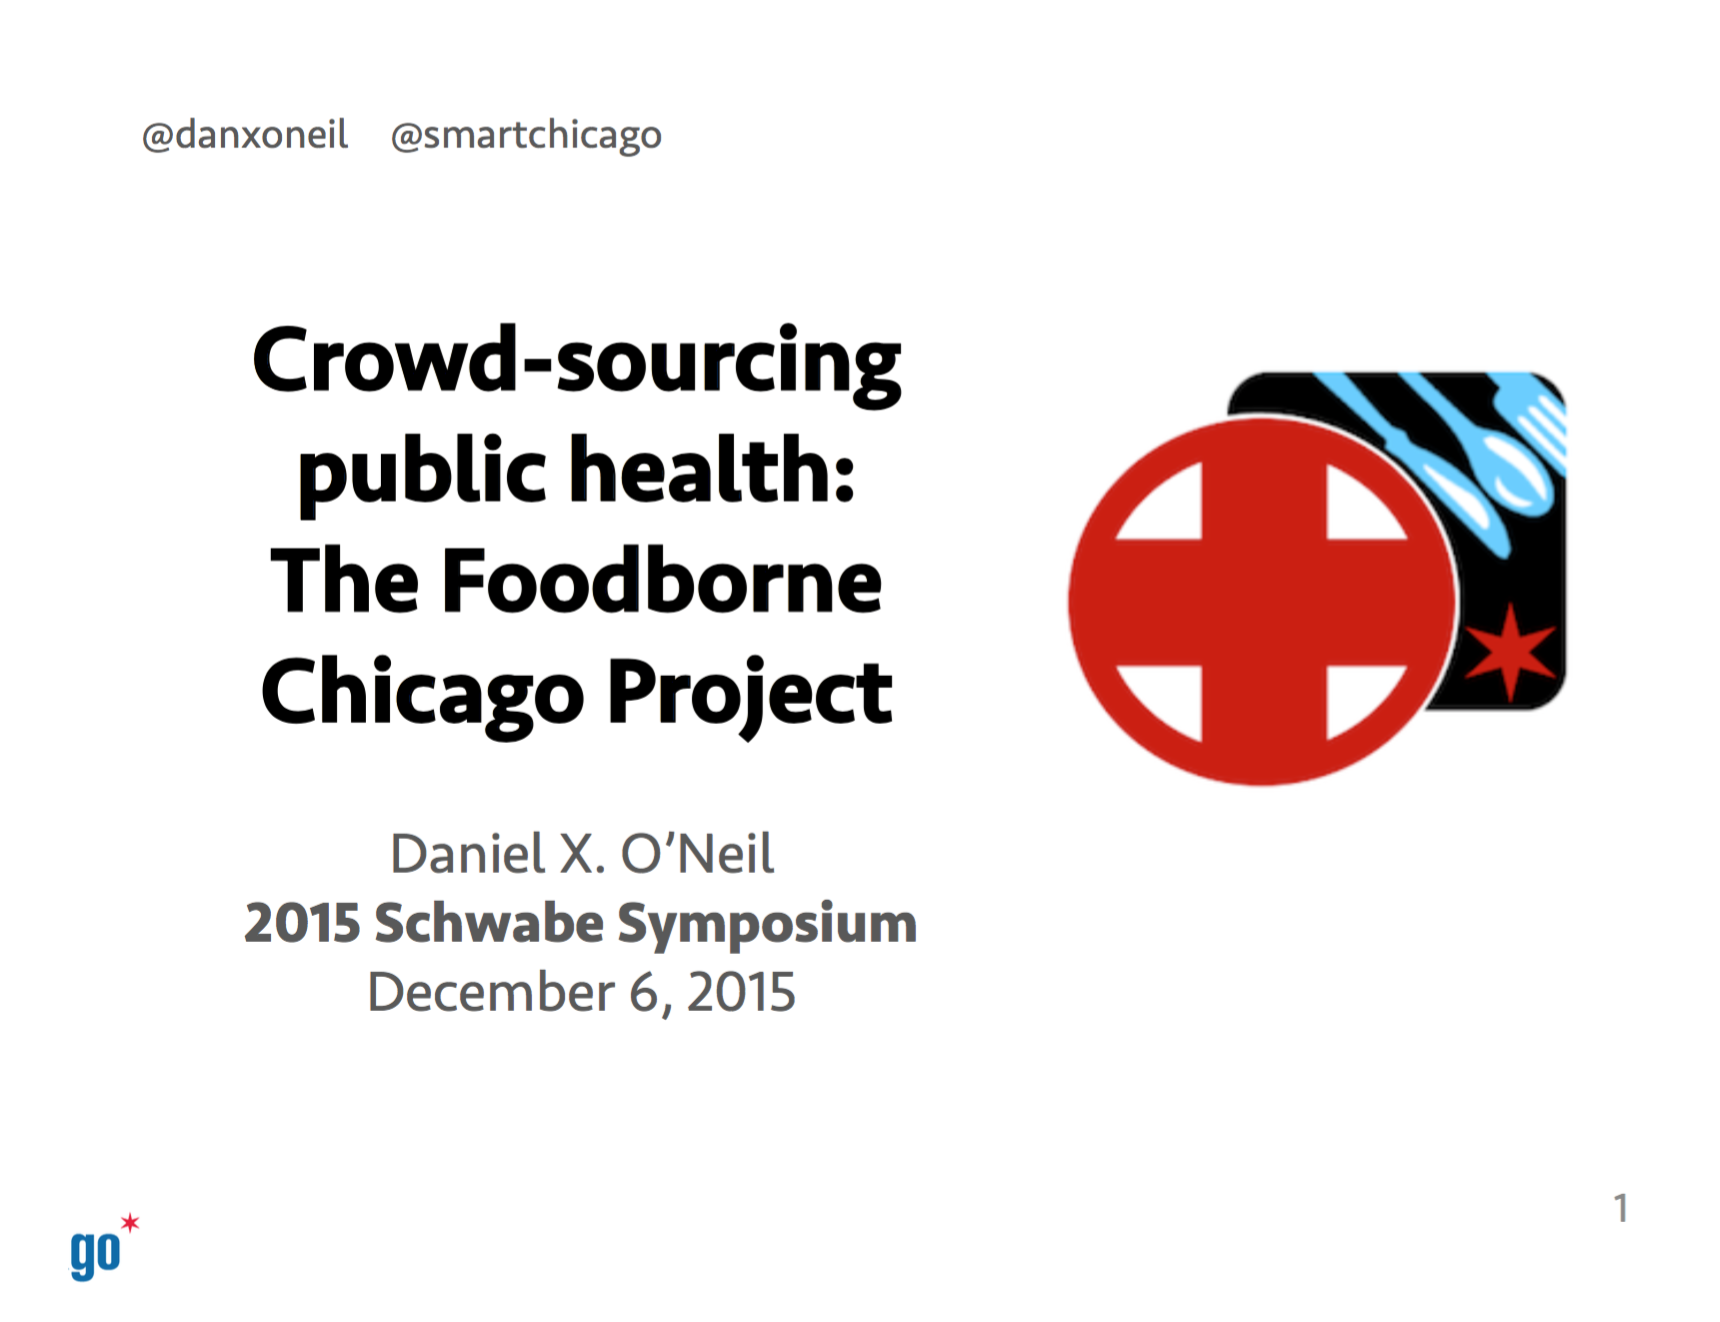 Talk: Schwabe Symposium 2015: Big, Open, Crowd-sourced and Exhaust(ed)!